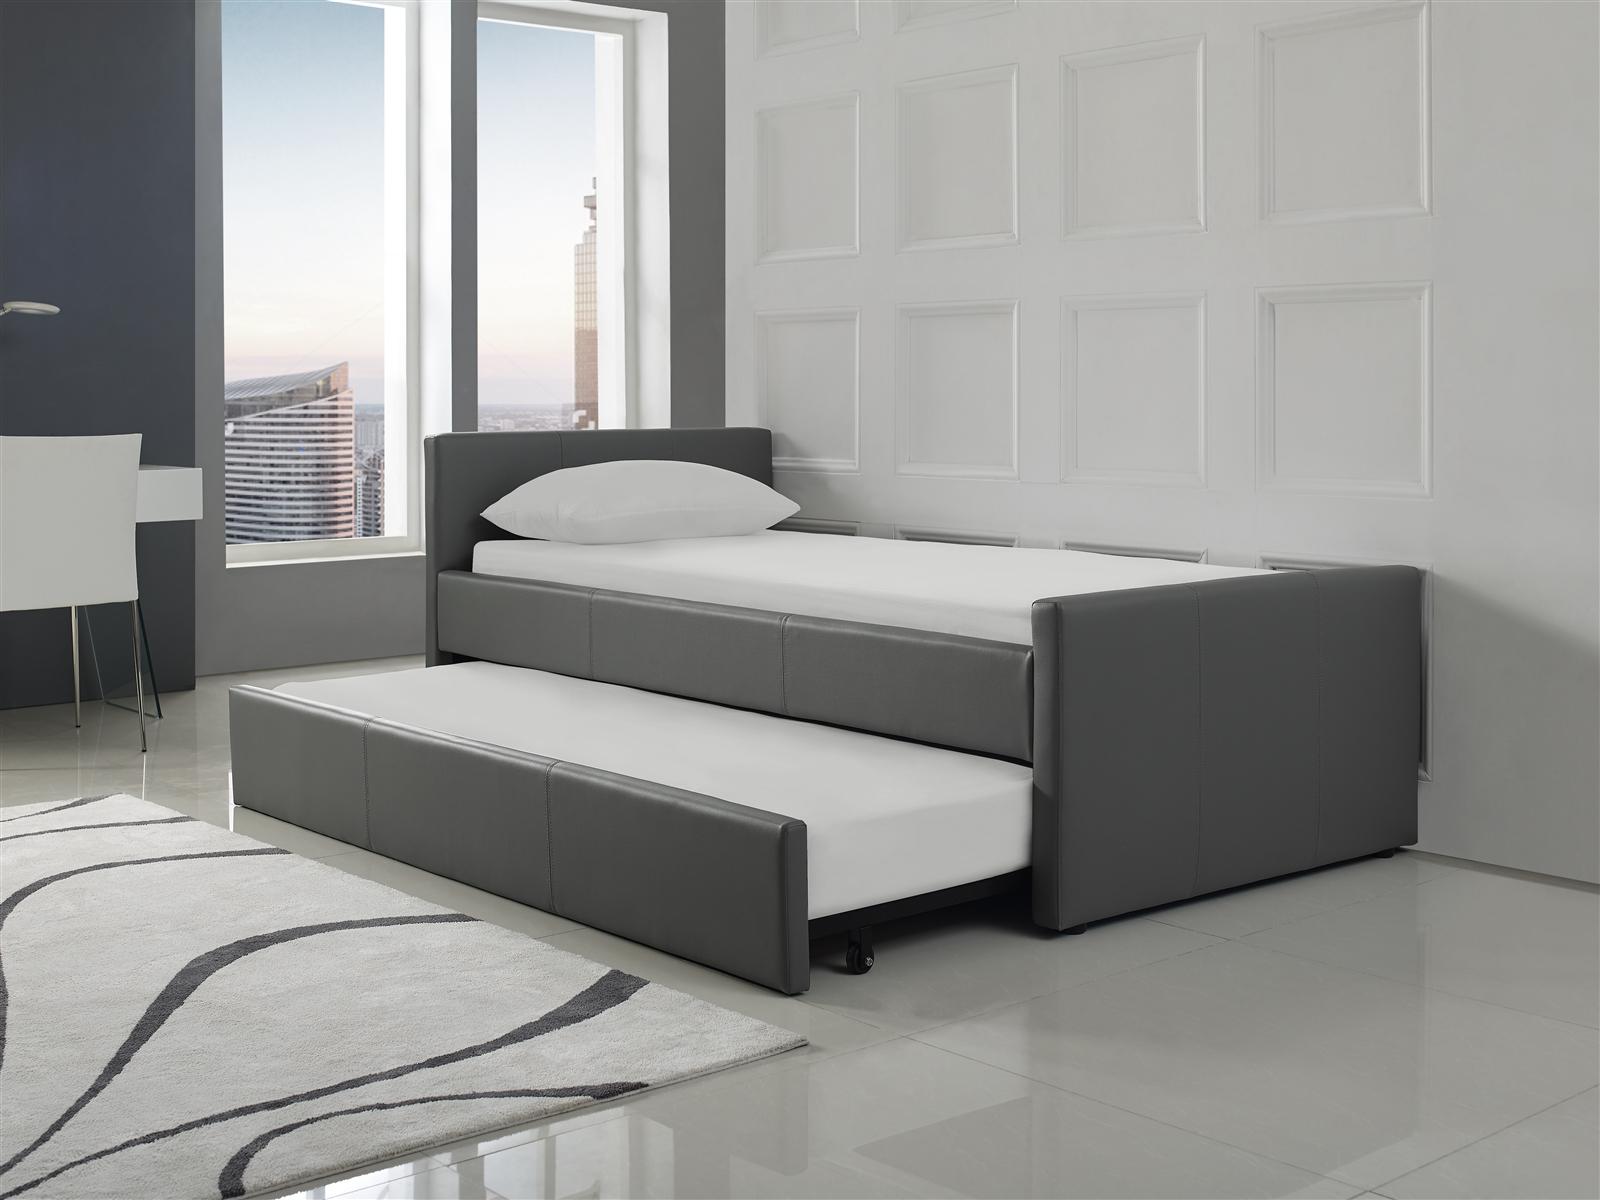 Contemporary, Modern Trundle Bed DUETTE CB-14BDG-XLTWIN in Dark Gray Eco-Leather